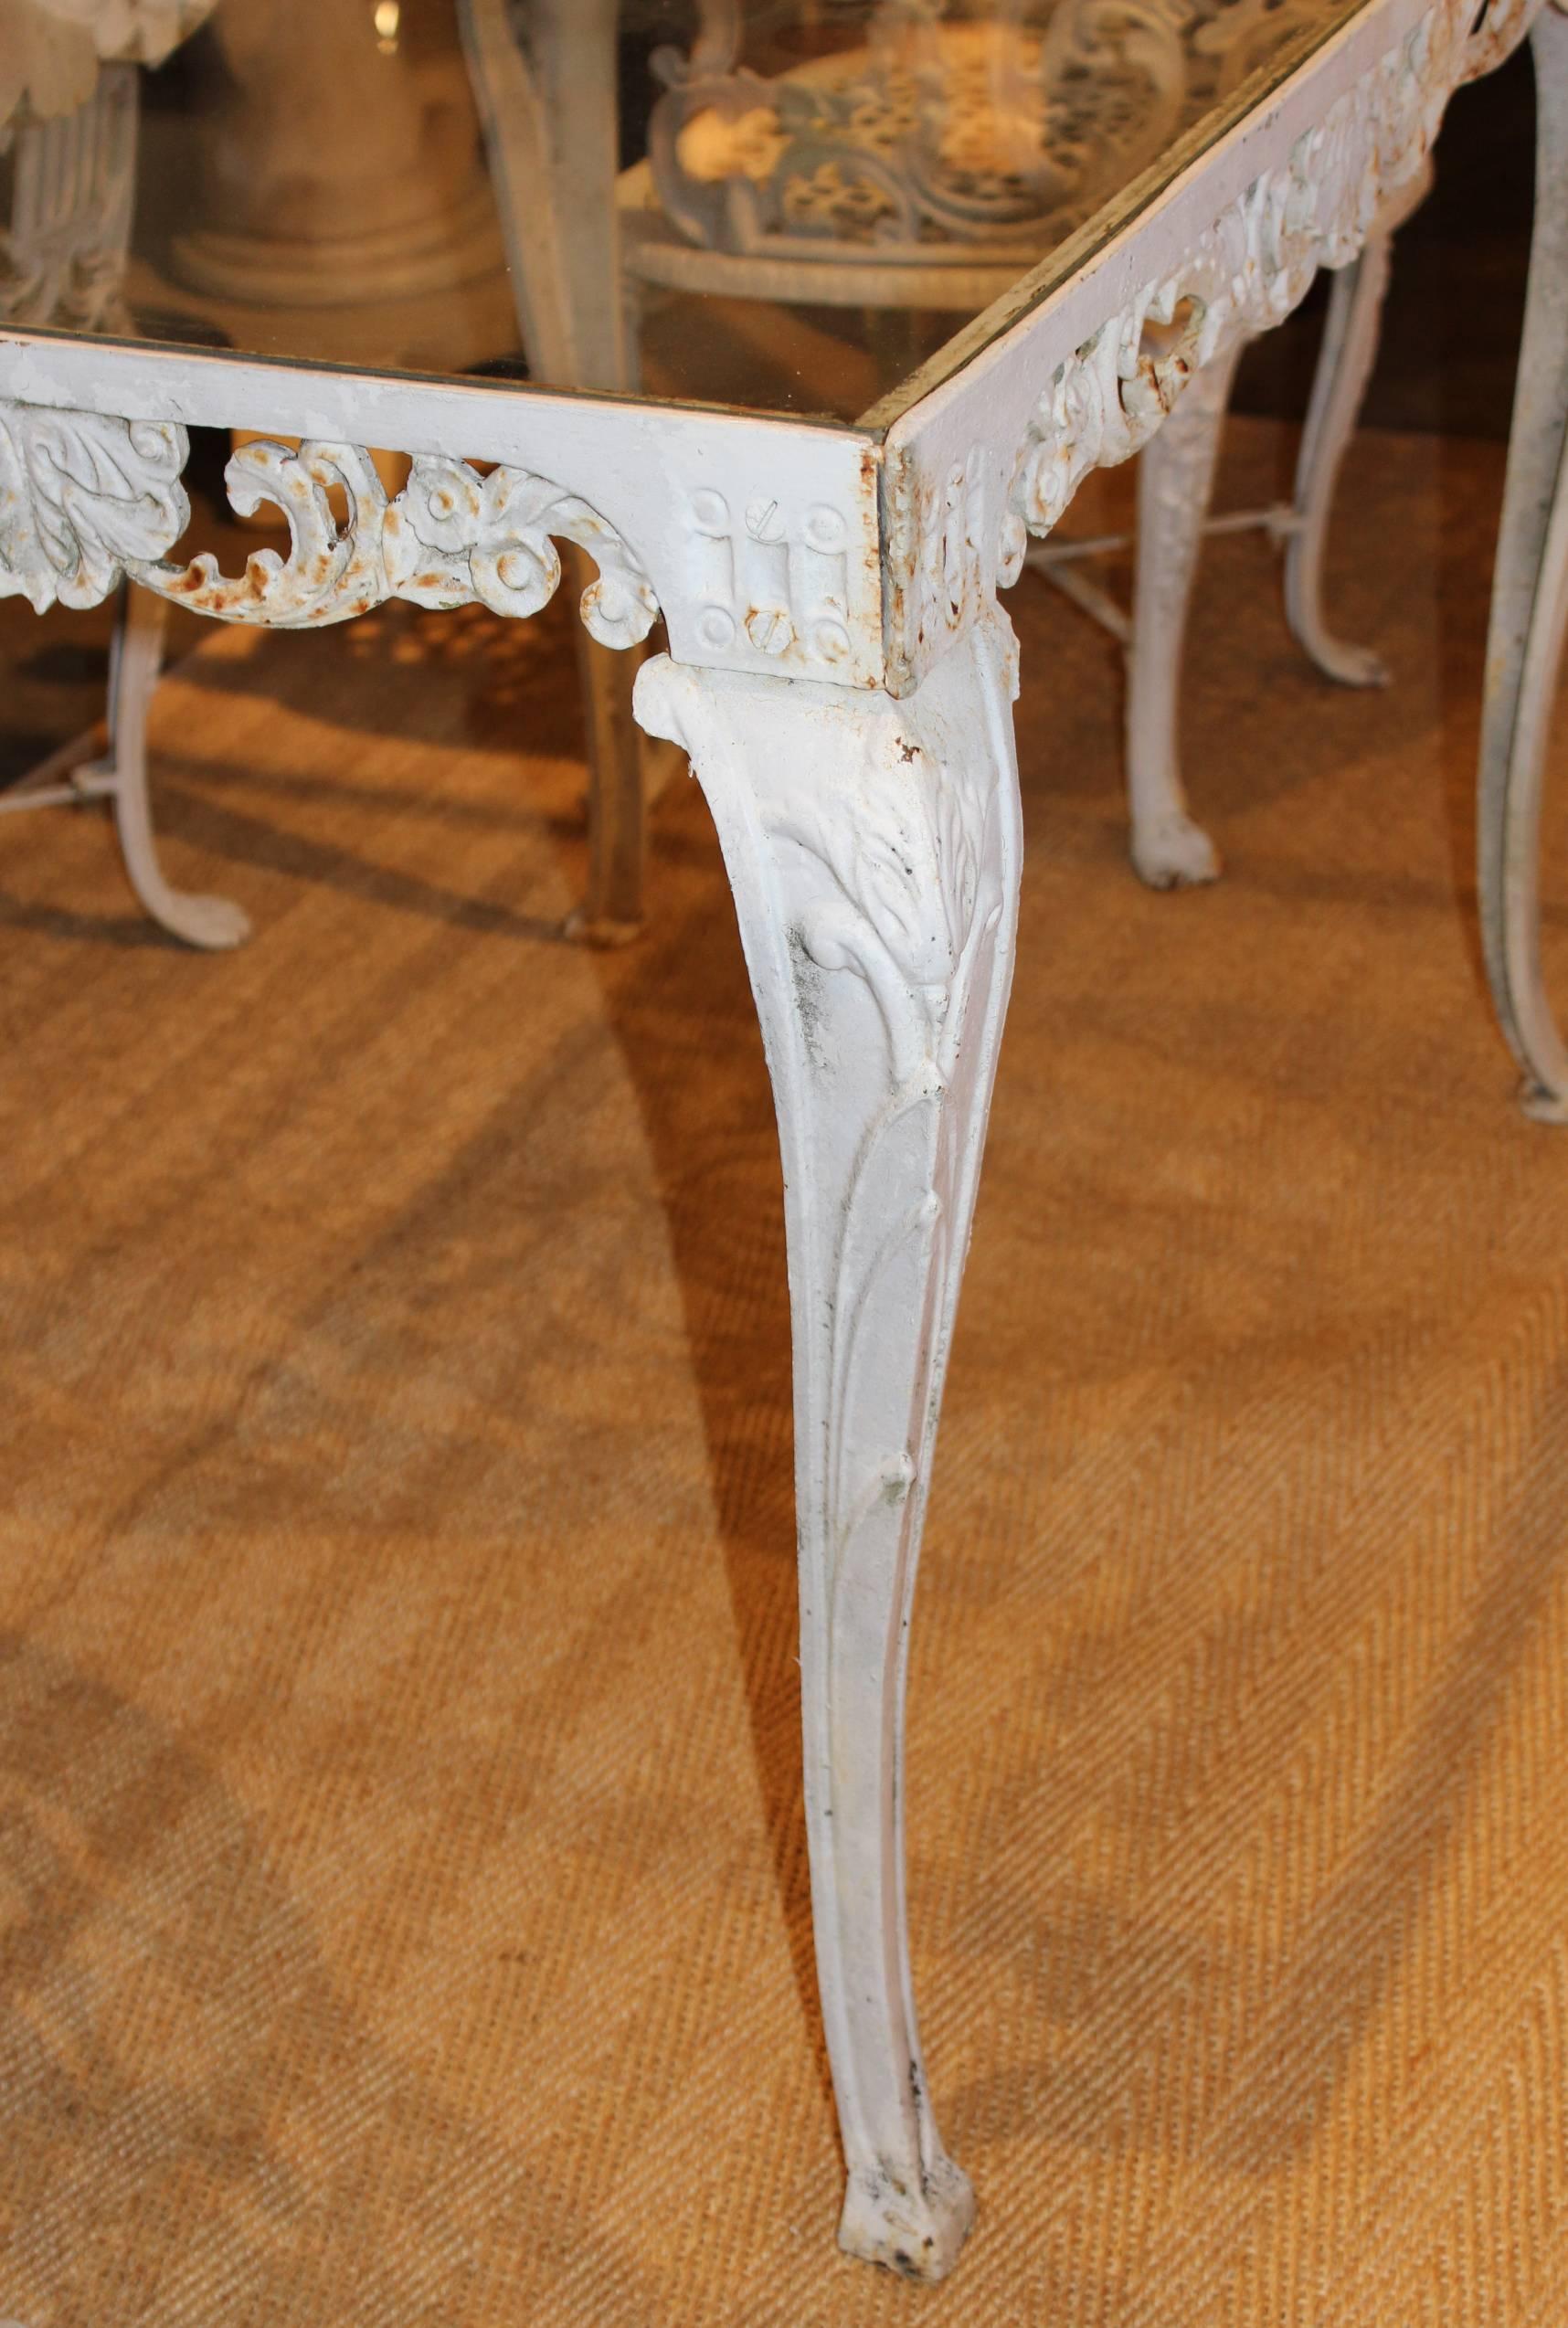 wood and cast iron furniture